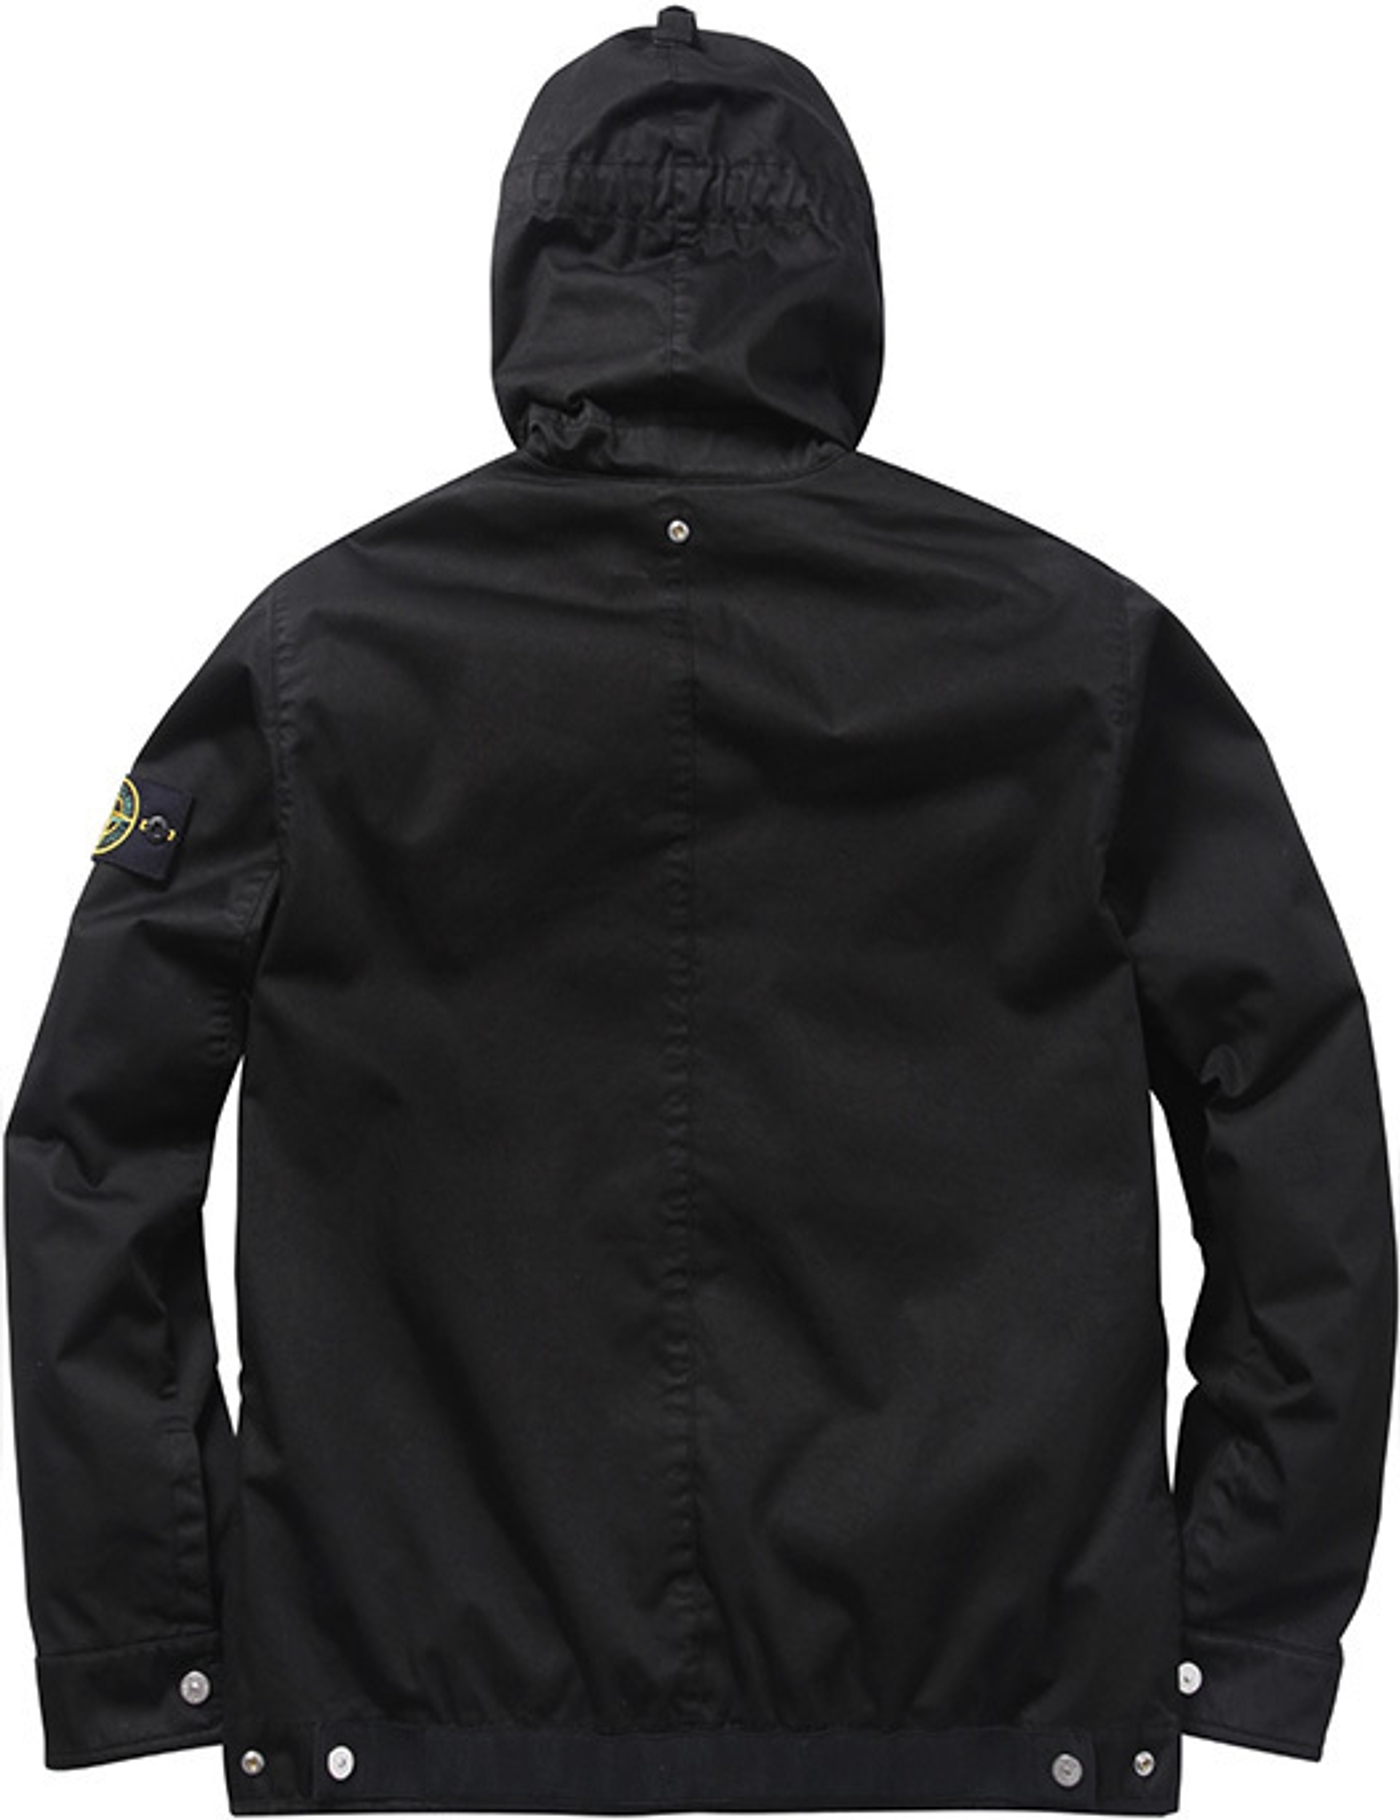 Raso Gommato Cover Nero Jacket 
Wind and water-resistant cotton with removable down liner. Removable eye mask with stow away hood.<br>
Made by Stone Island<br> (23/36)